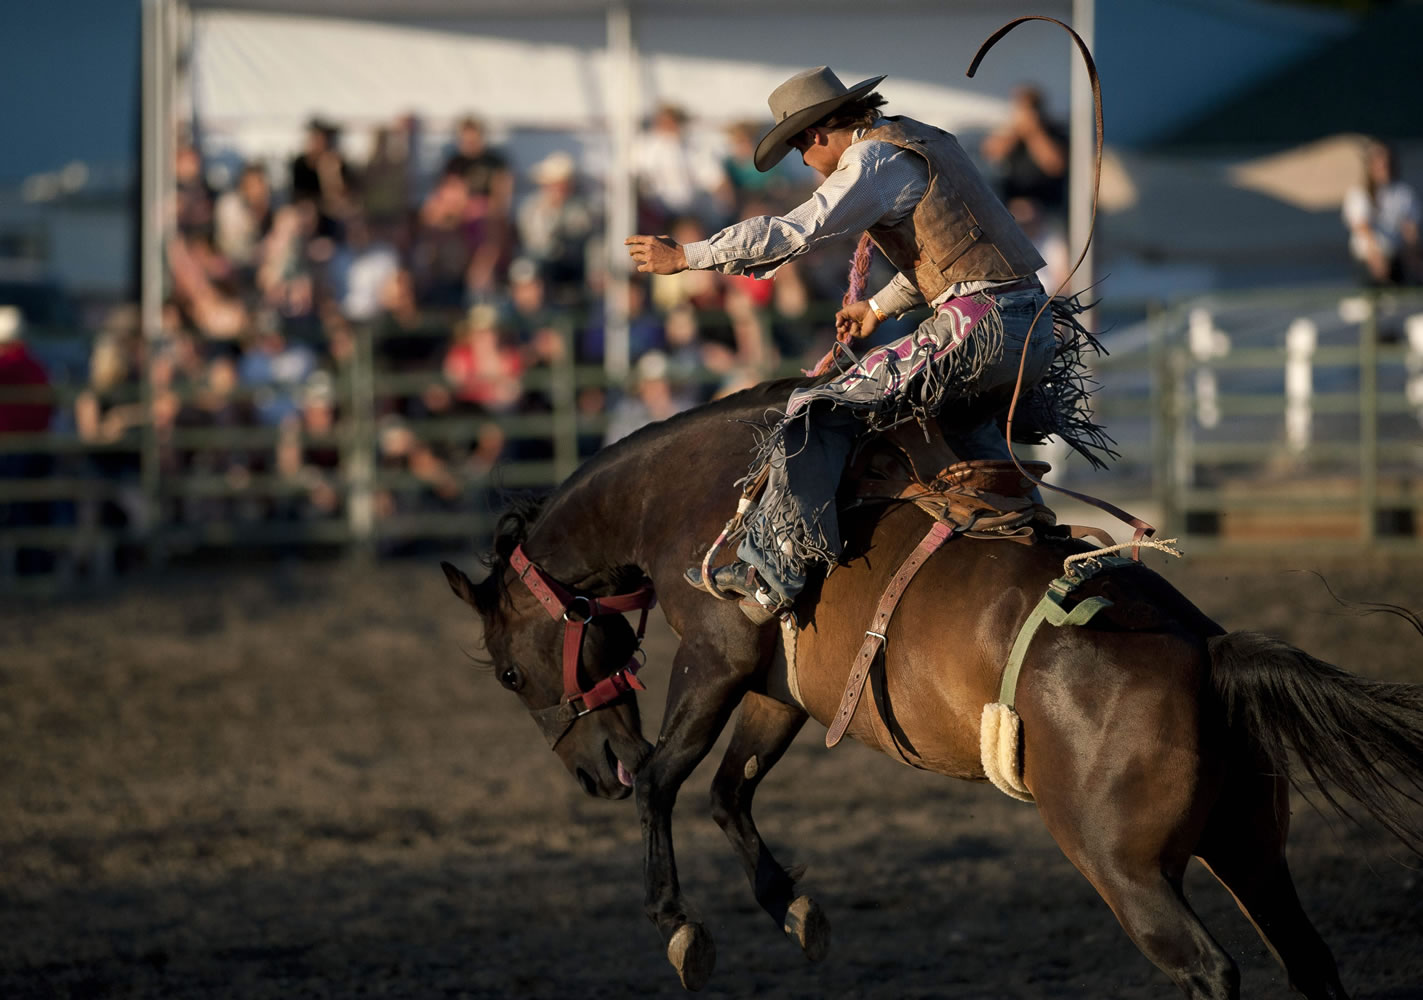 Photos by Zachary Kaufman/The Columbian
Trent Ezell, 19, of Emerson, Ore., gets his turn in the saddle bronc riding Saturday night at the Vancouver Rodeo. About 460 contestants competed over the rodeo's four-day run.